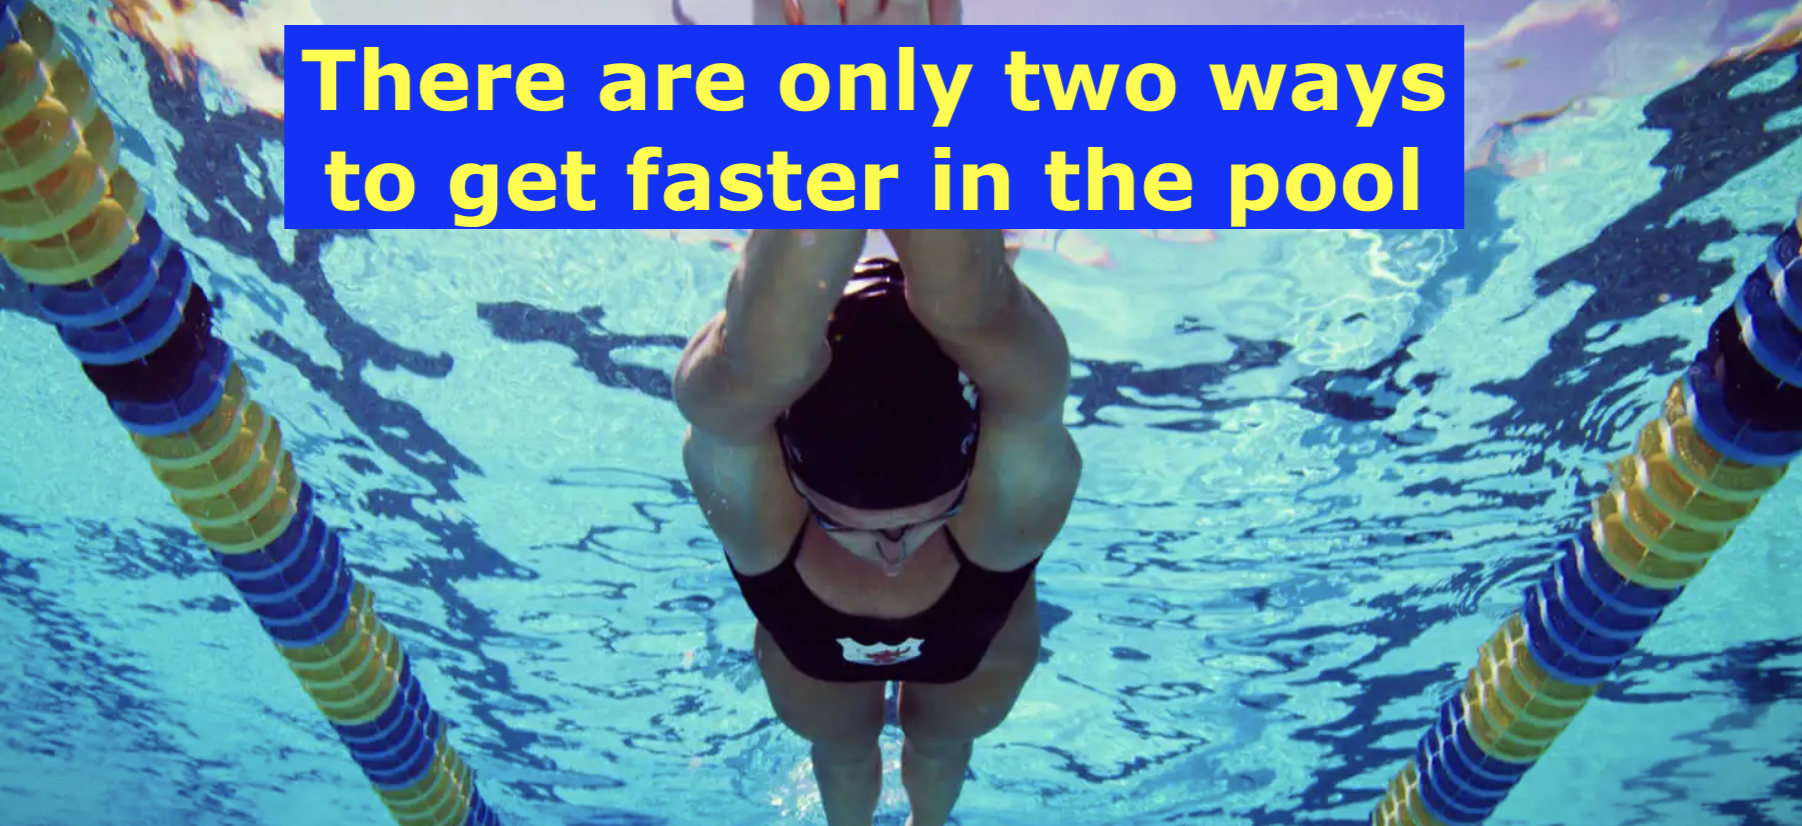 There are only two ways to get faster in the pool